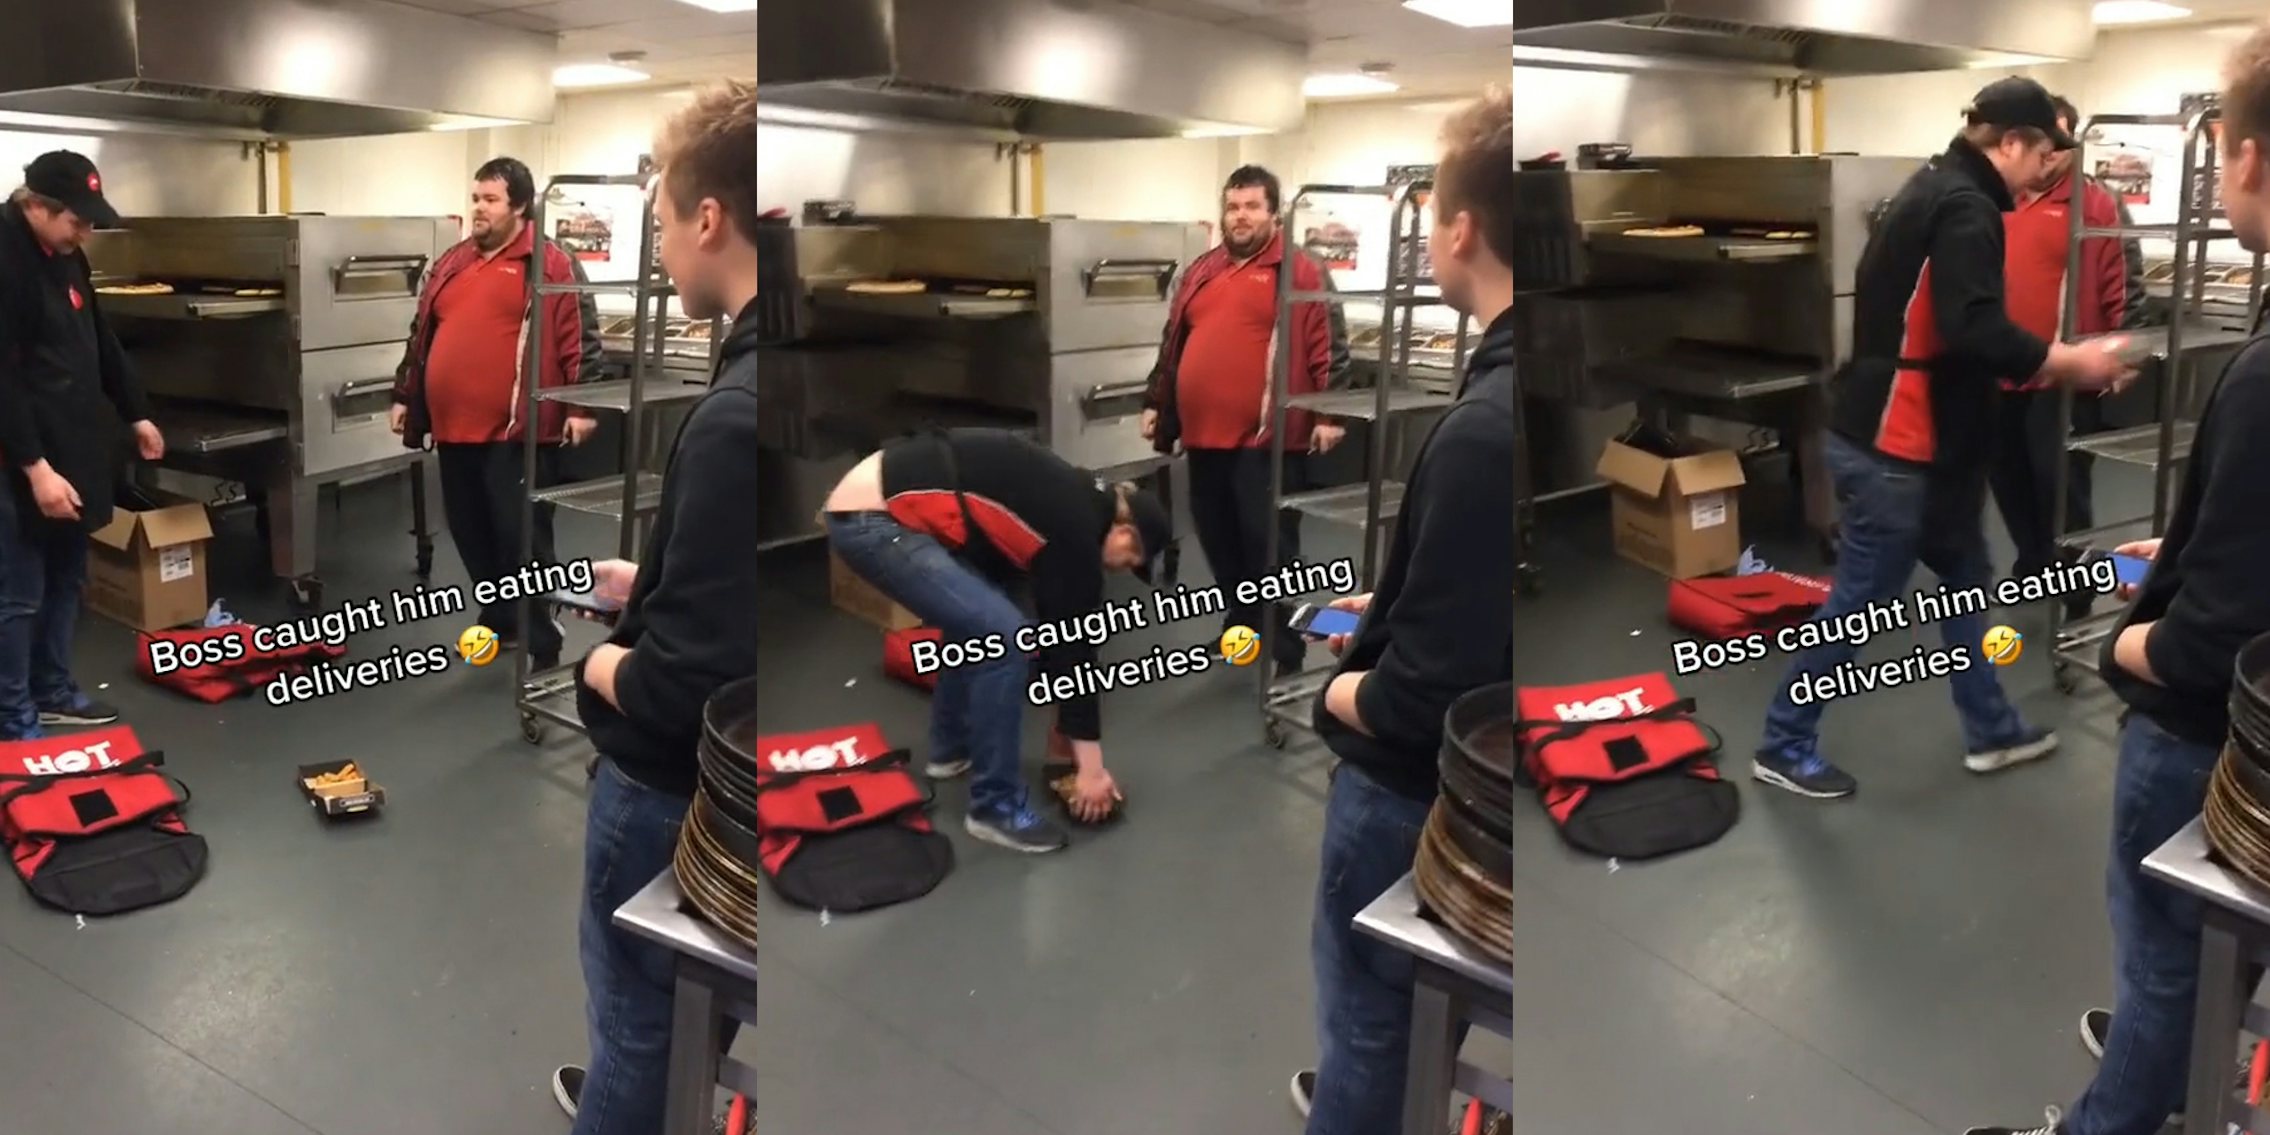 workers in kitchen with caption 'Boss caught him eating deliveries' (l) workers in kitchen watching worker grab food with caption 'Boss caught him eating deliveries' (c) workers in kitchen with caption 'Boss caught him eating deliveries' (r)